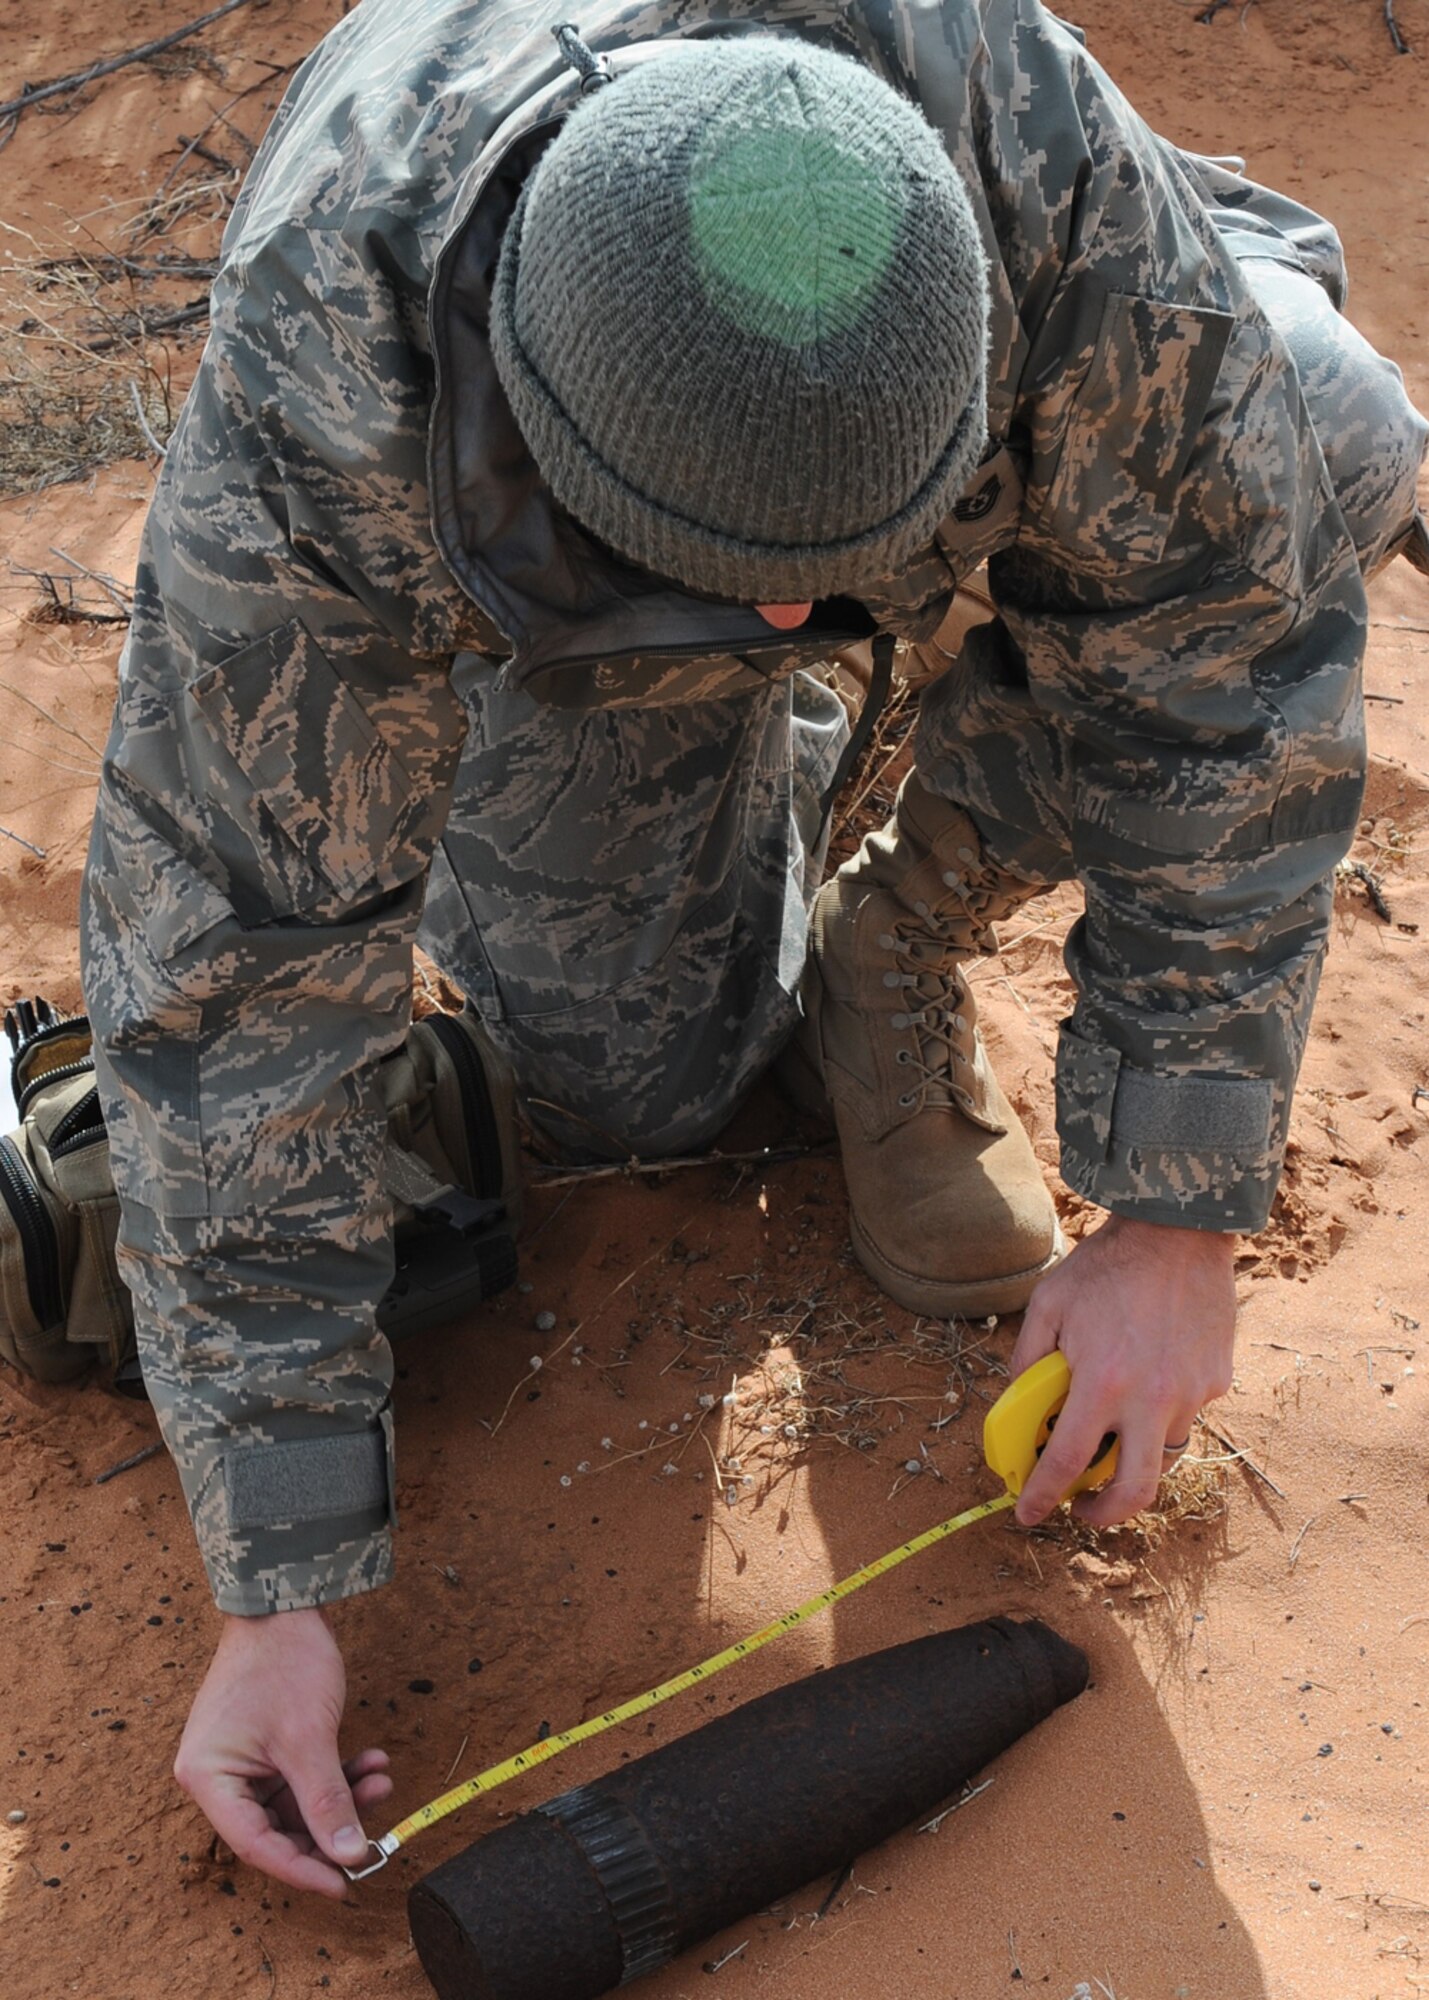 Members of the 49th Fighter Wing's explosive ordnance disposal team assisted with the detonation of a UXO Dec. 23, 2008. The ordnance was found near Oro Grande, NM, by individuals riding all terrain vehicles. Both military and civilian organizations were involved with the safe disposal of the ordnance, which was on land owned by the Bureau of Land Management.